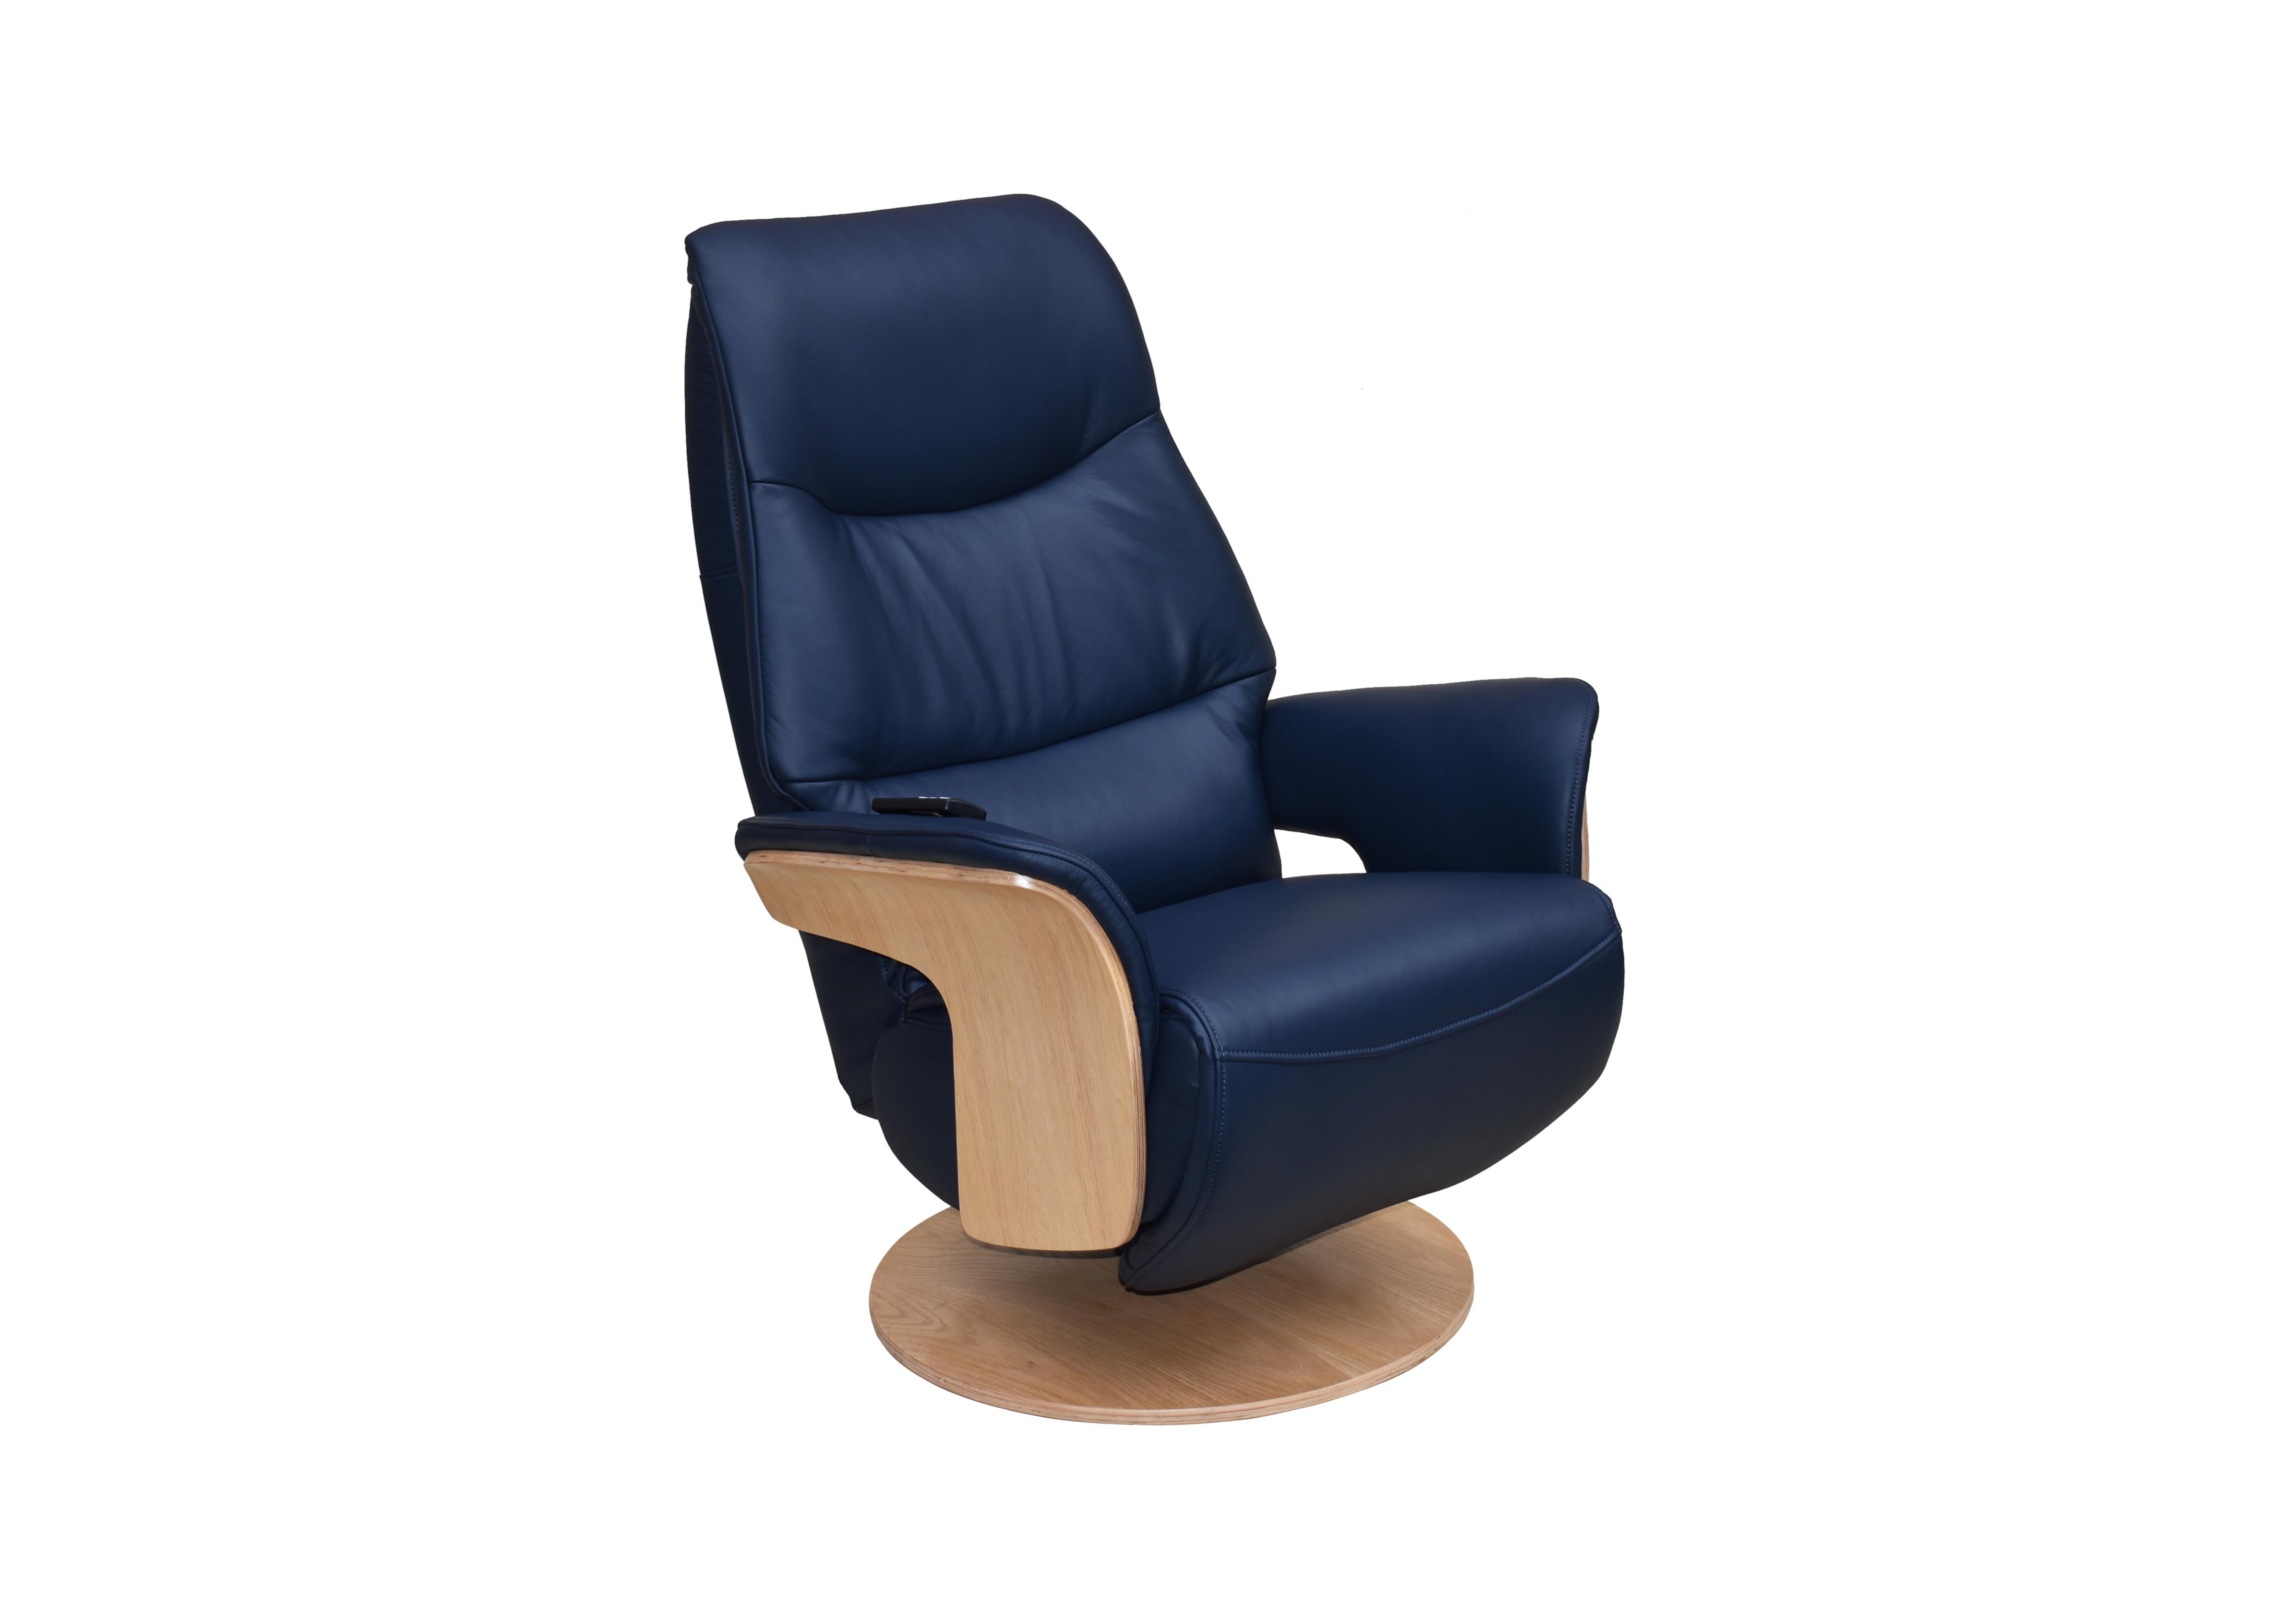 Olaf Leather Look Swivel Recliner Chair in Navy on Furniture Village